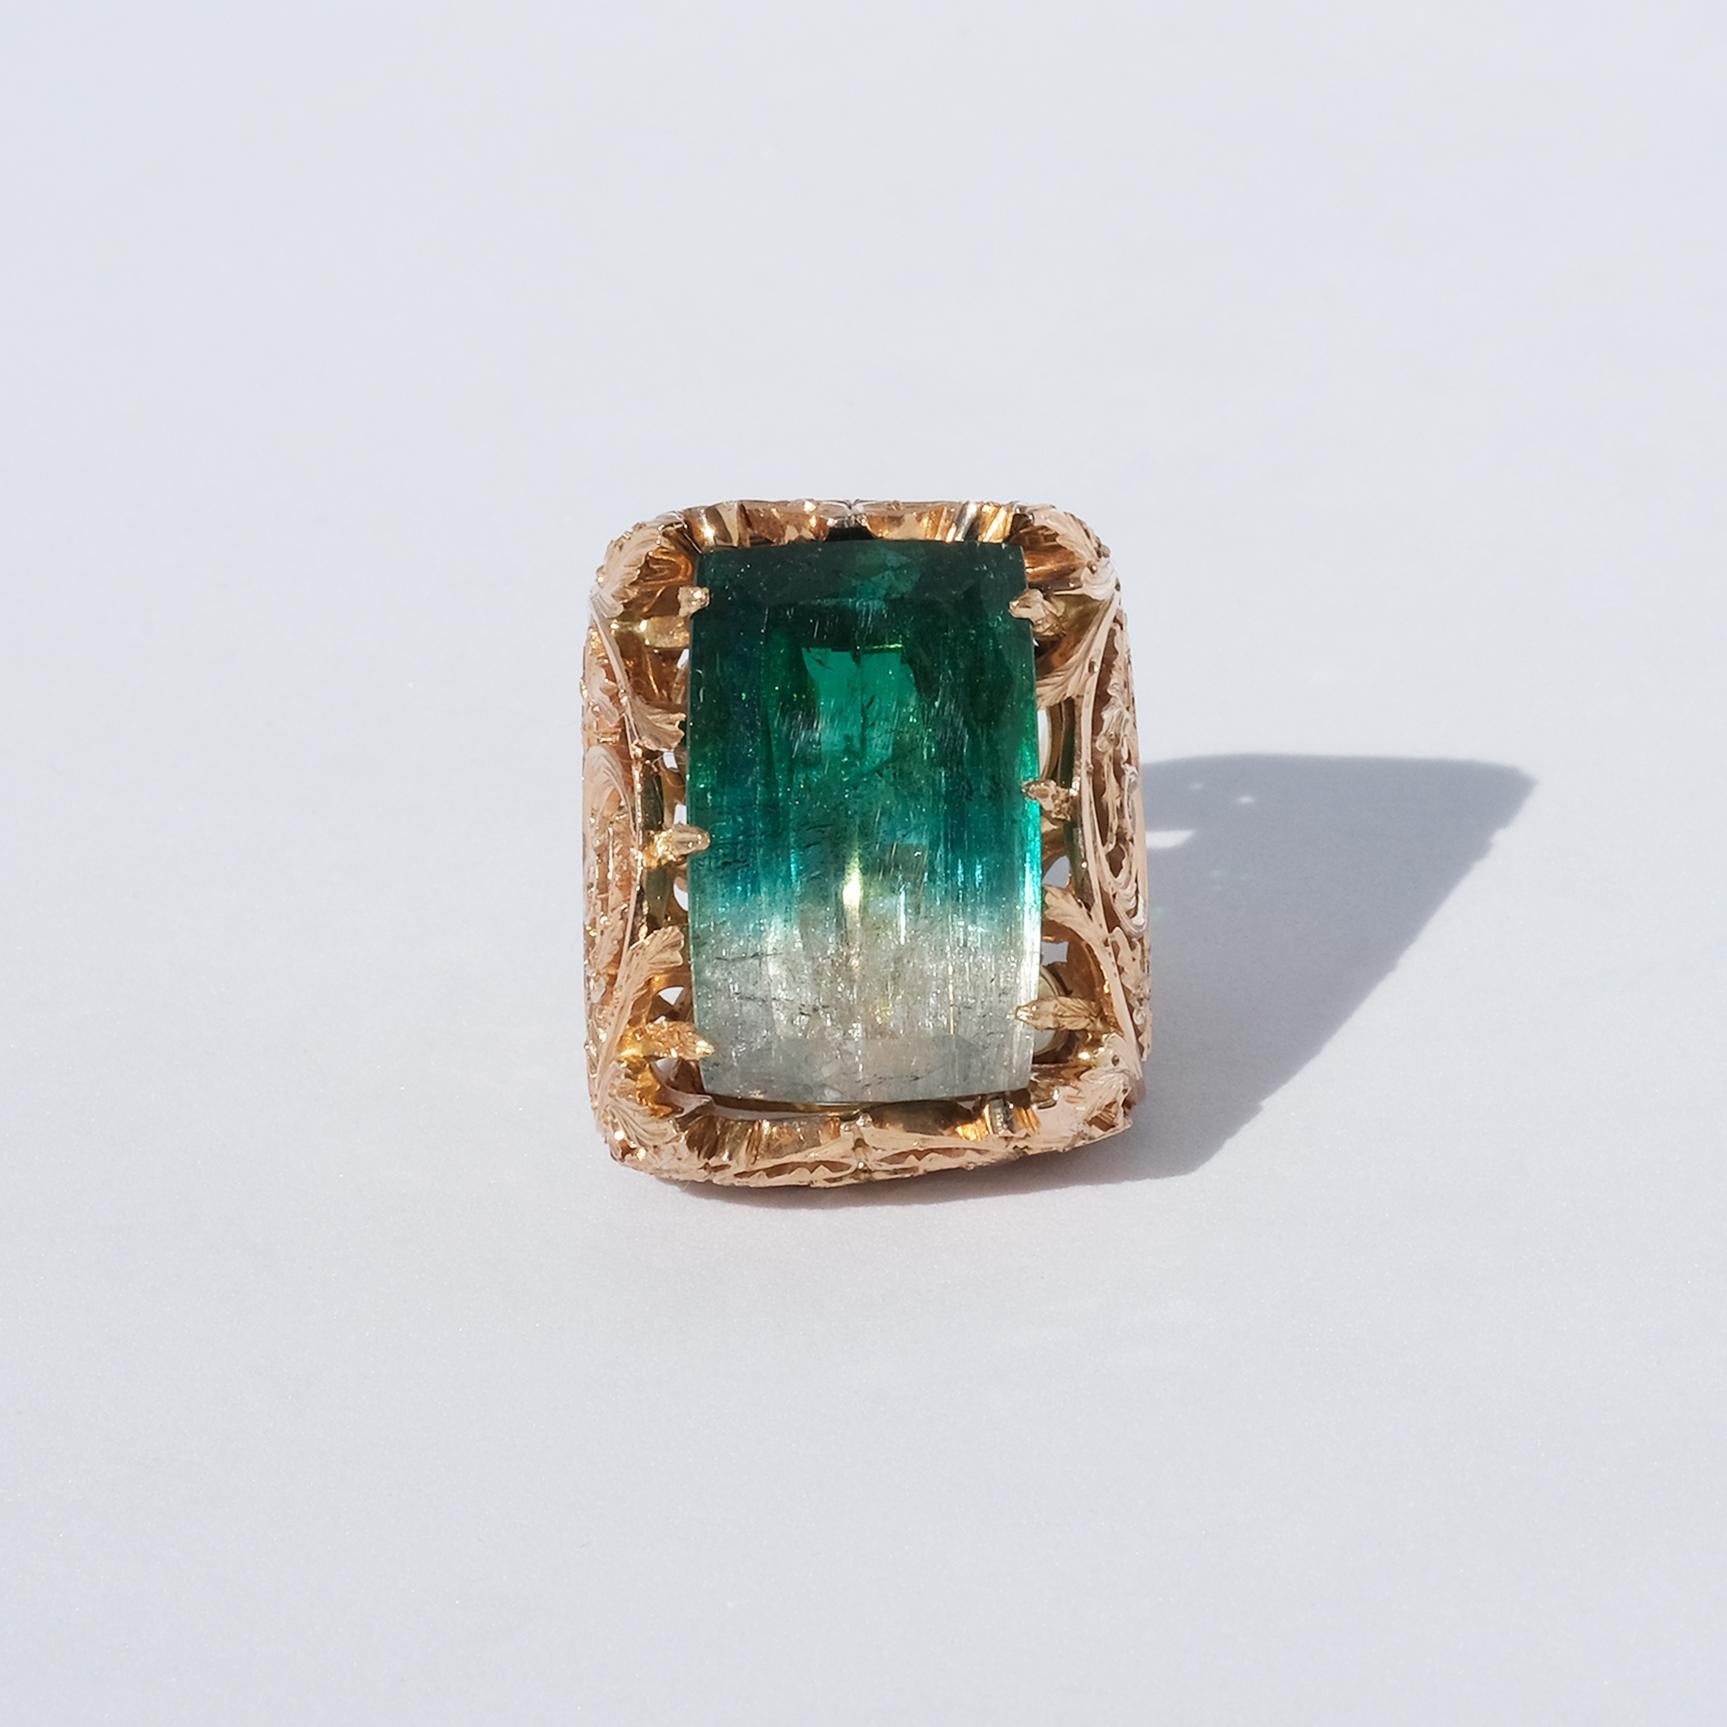 This amazing ring has a large stair-cut tourmaline and its 18 karat setting is adorned with a beautiful rocaille pattern. The quality of the chiseling of this ring is extraordinary.

The unconventional very large size of this ring radiates